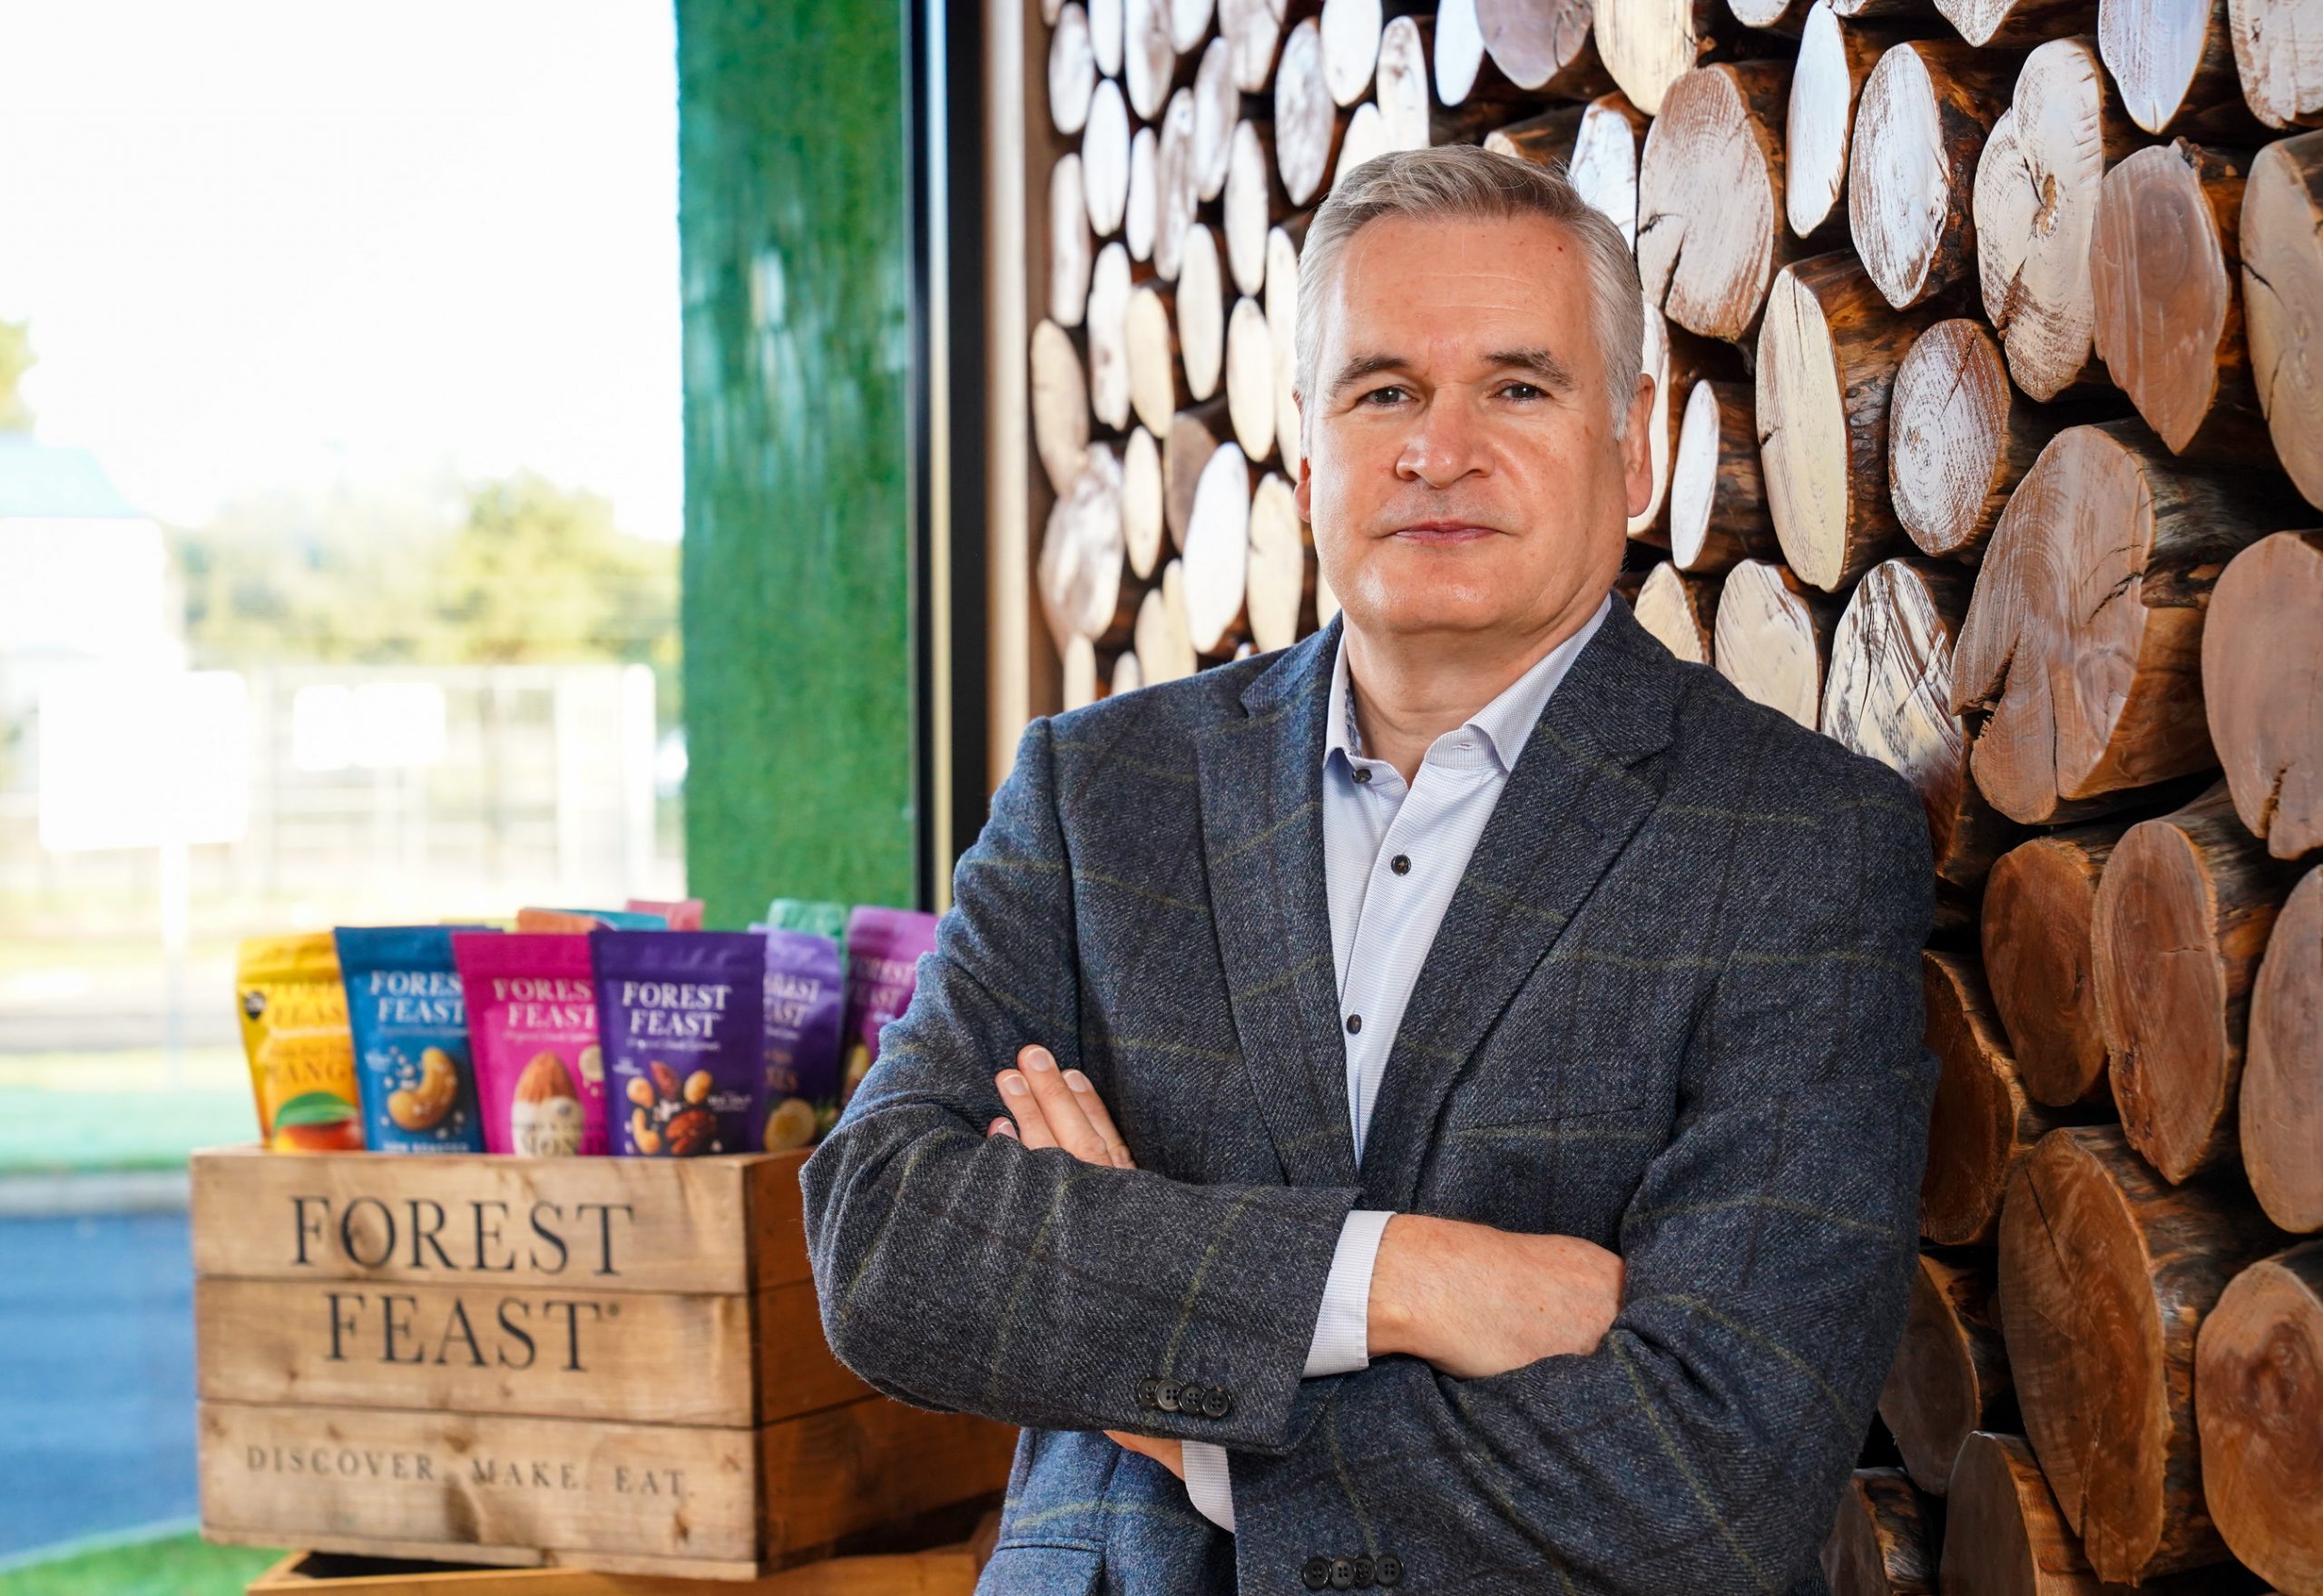 Kestrel Food’s Founder and Managing Director Michael Hall has been awarded an MBE